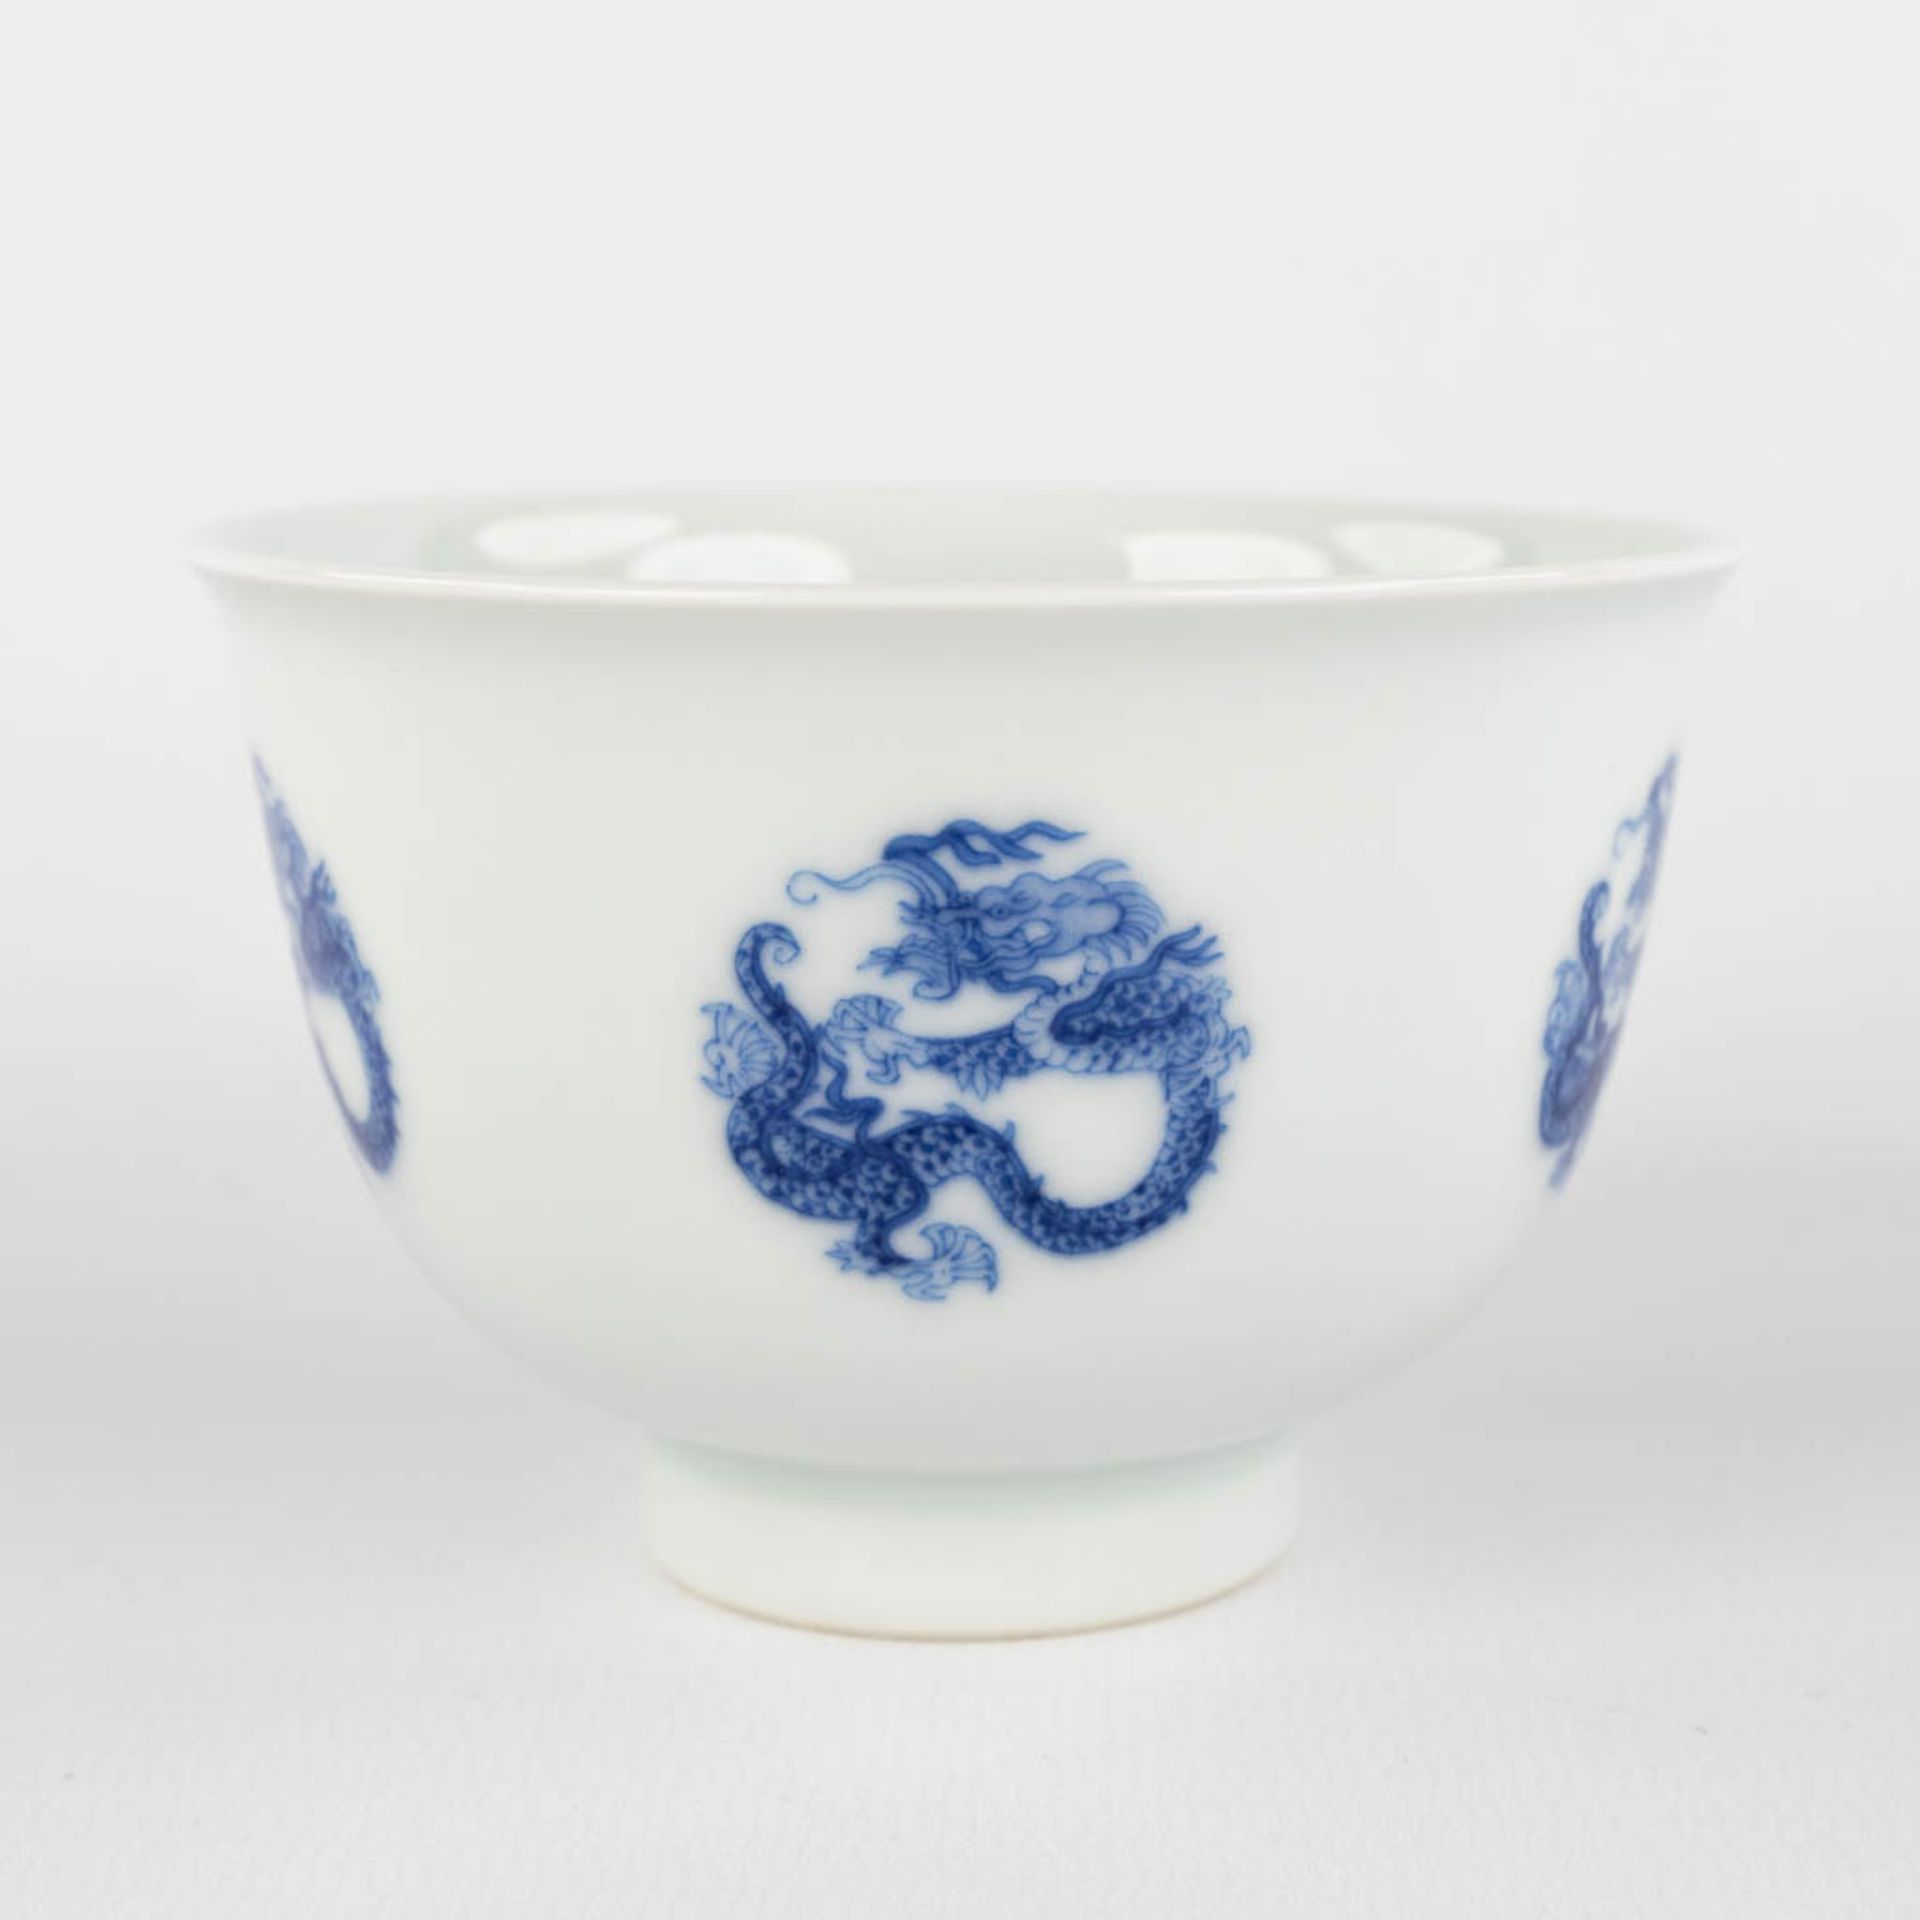 A Chinese teapot with a blue-white decor of a dragon. Kangxi mark and period. (D:9 x H:6 cm)